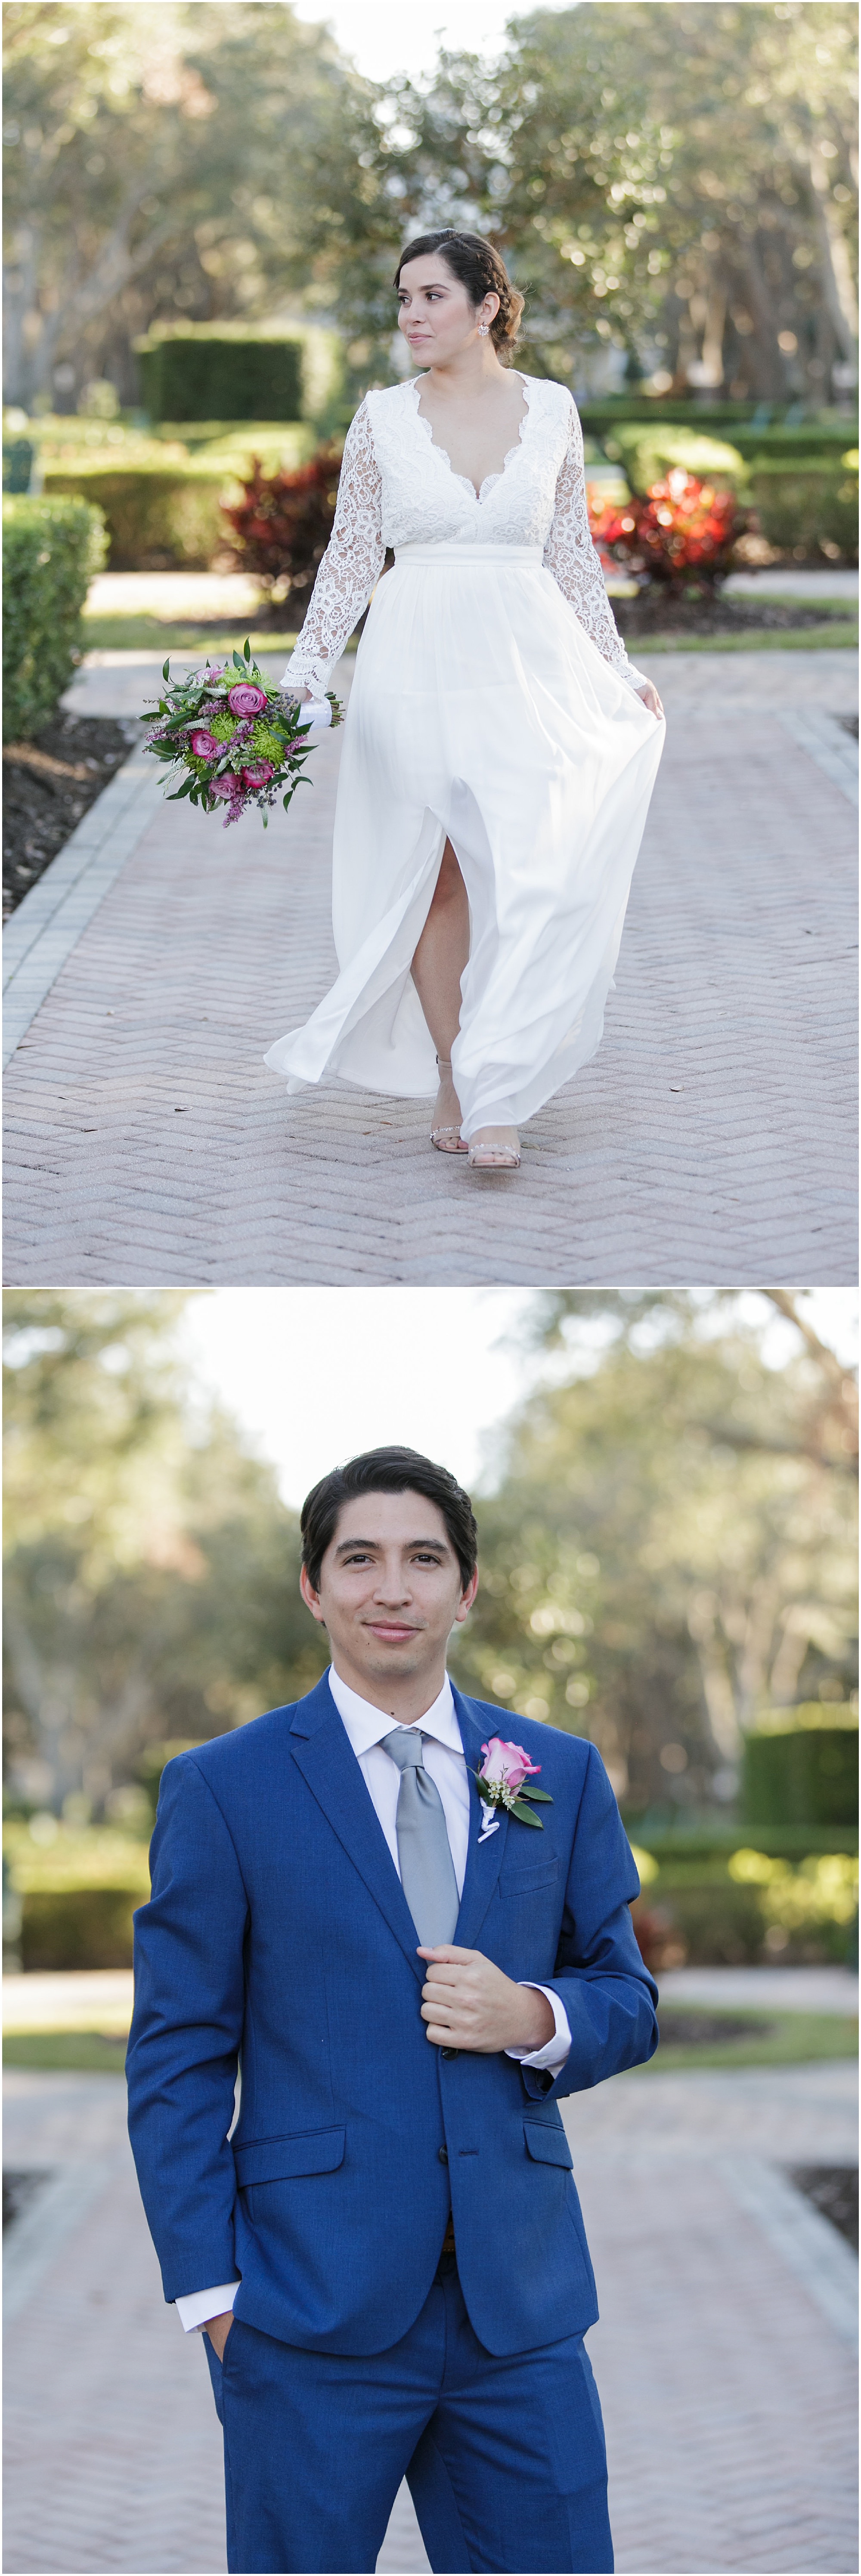 One photo of the bride walking down the sidewalk and another photo of the groom in a blue suit. 